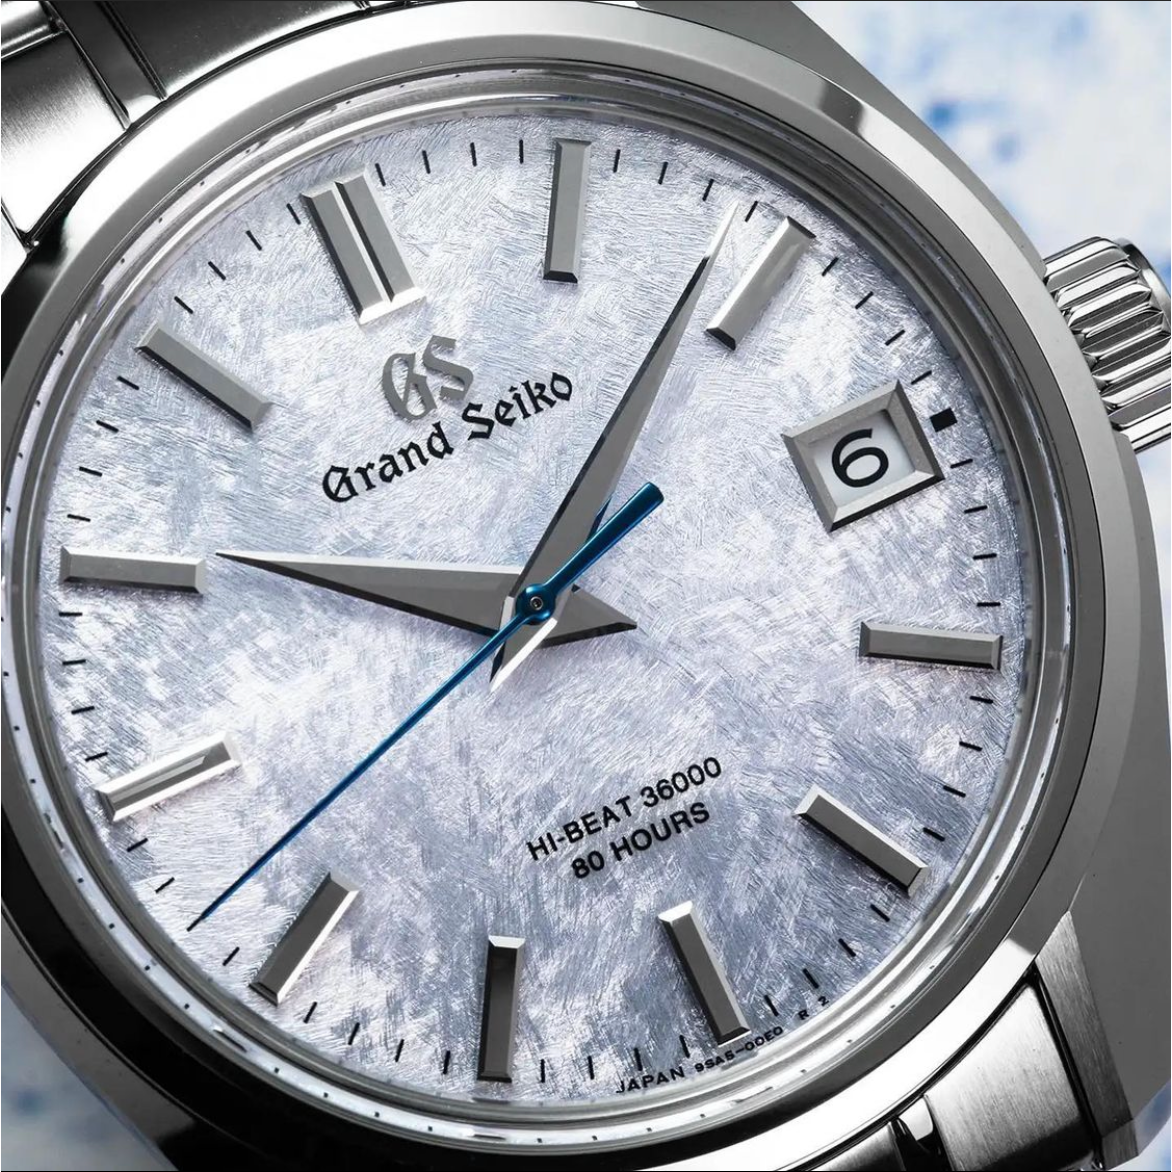 Grand Seiko Melting Snow Mount Iwate SLGH013 – Classic Creations